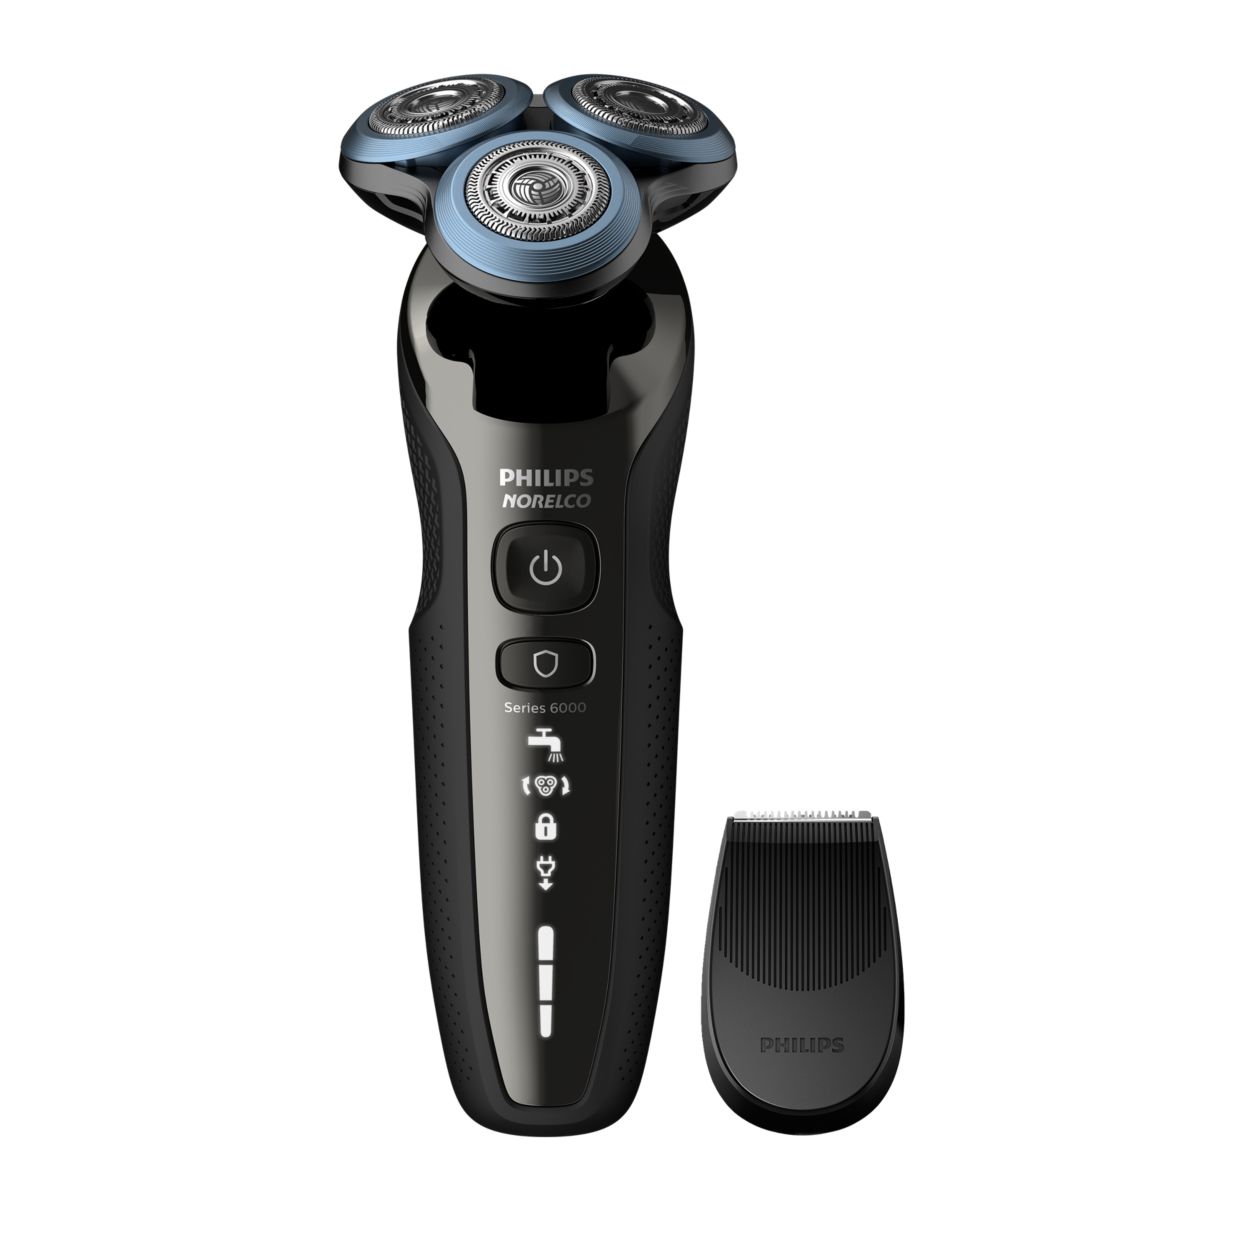 rok Geweldig Materialisme Shaver series 6000 Wet and dry electric shaver S6880/81 | Norelco